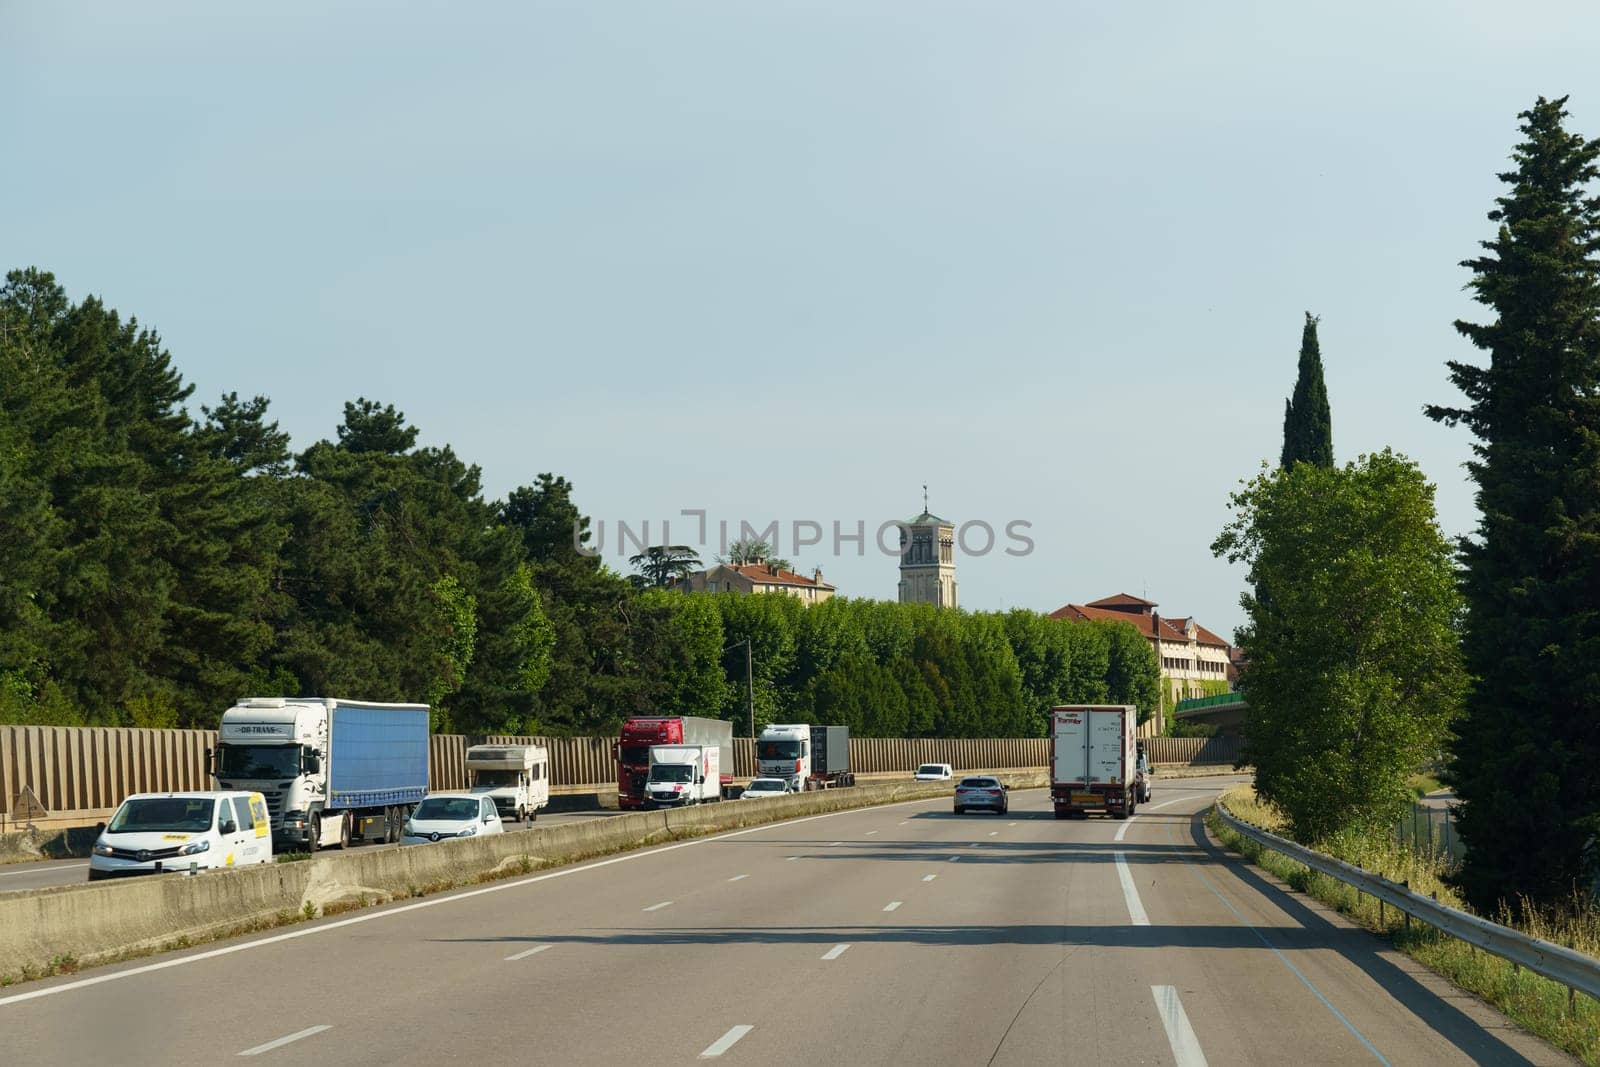 Vaugry Gard, France - May 30, 2023: A long convoy of trucks is seen moving down a busy highway, each vehicle following the one in front, as they transport goods to their respective destinations.